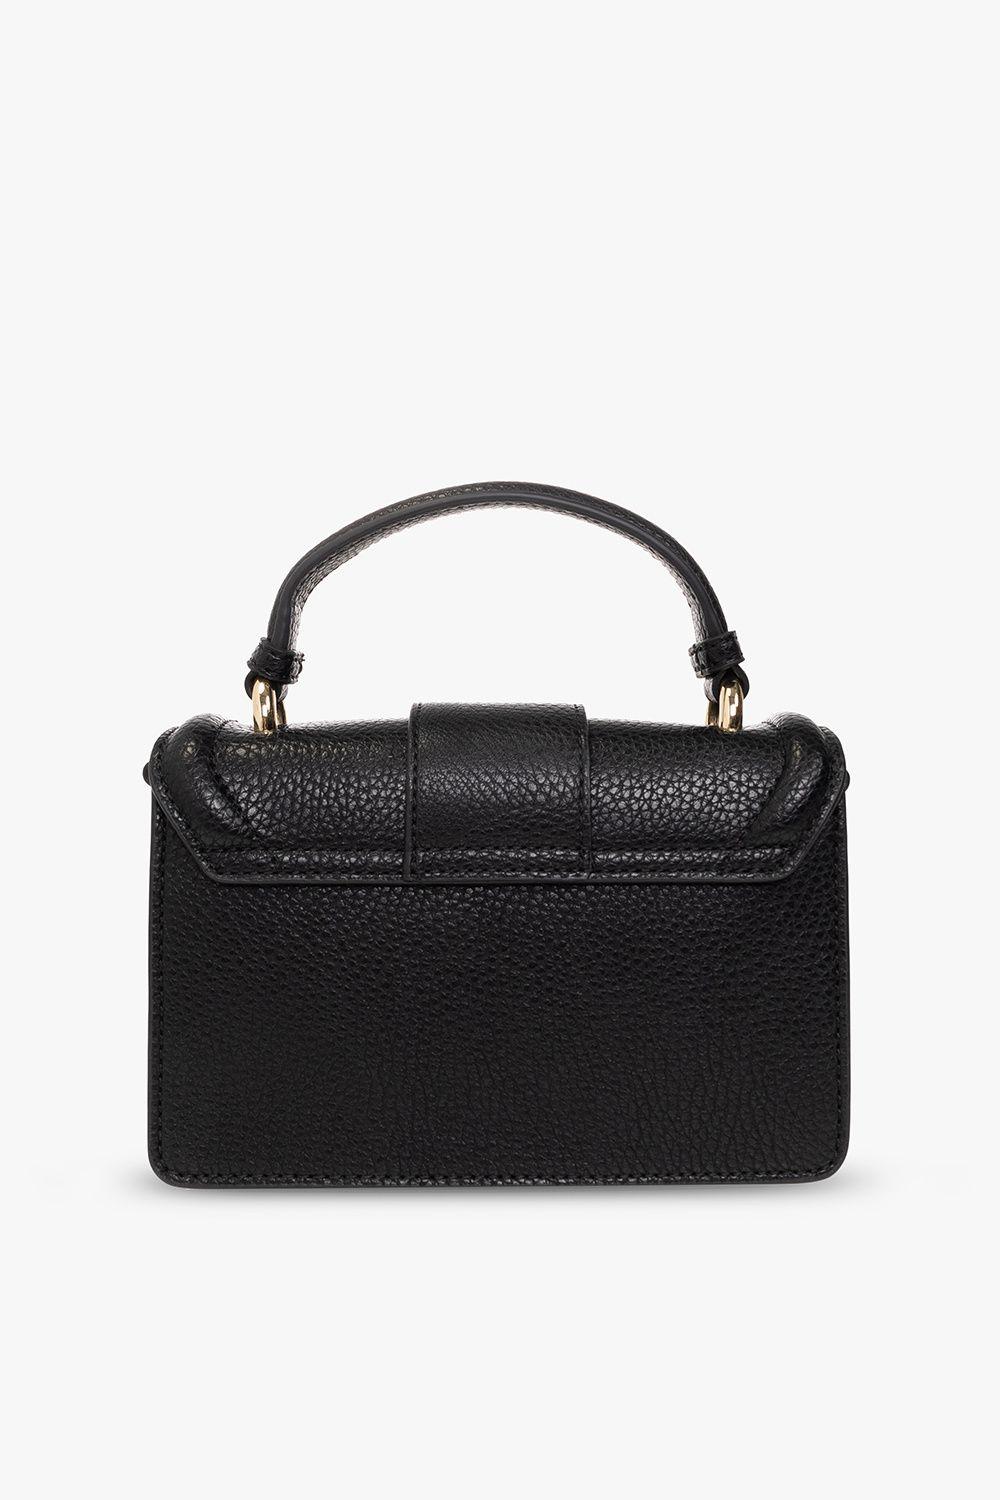 Versace Jeans Couture Shoulder Bag With Baroque Buckle in Black | Lyst